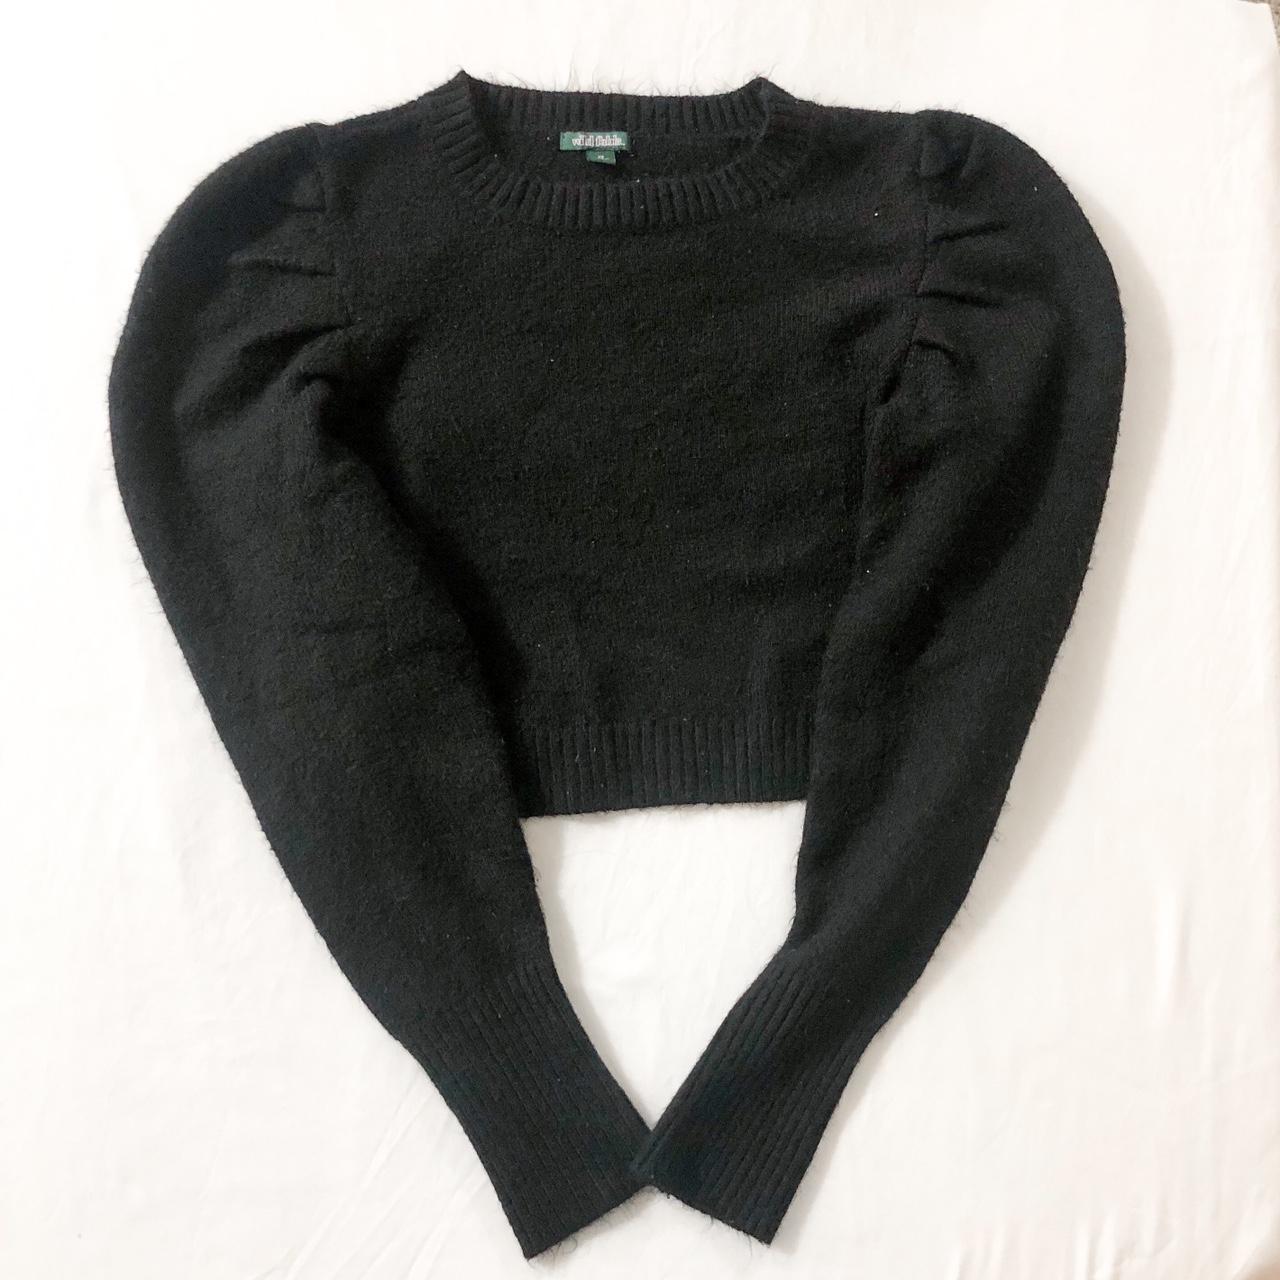 Black cropped sleeved sweater with embroidery I'm - Depop